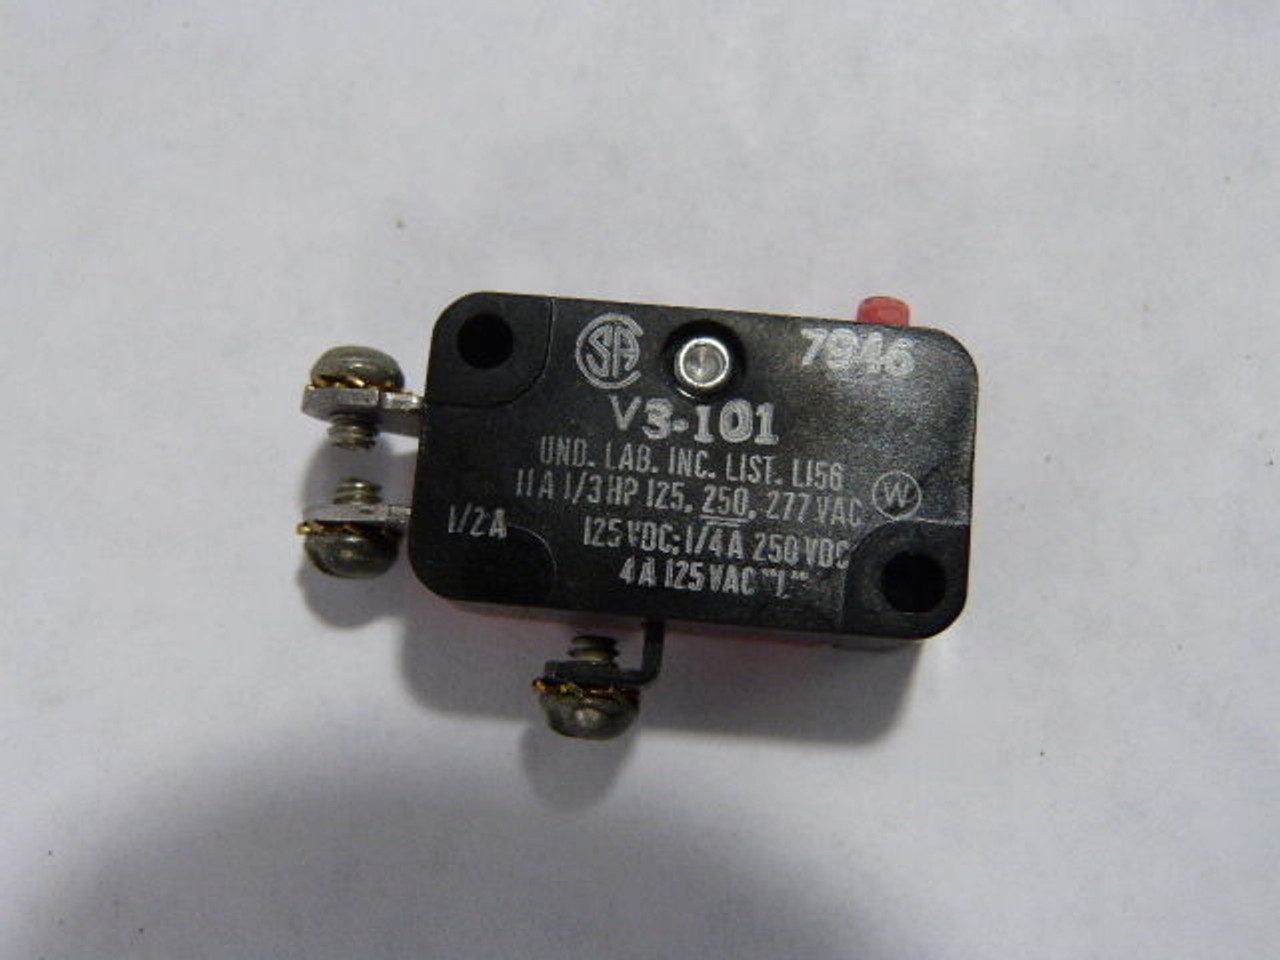 Microswitch V3-101 Snap Action Plunger Microswitch 11A 1/3HP 125/250/277V USED